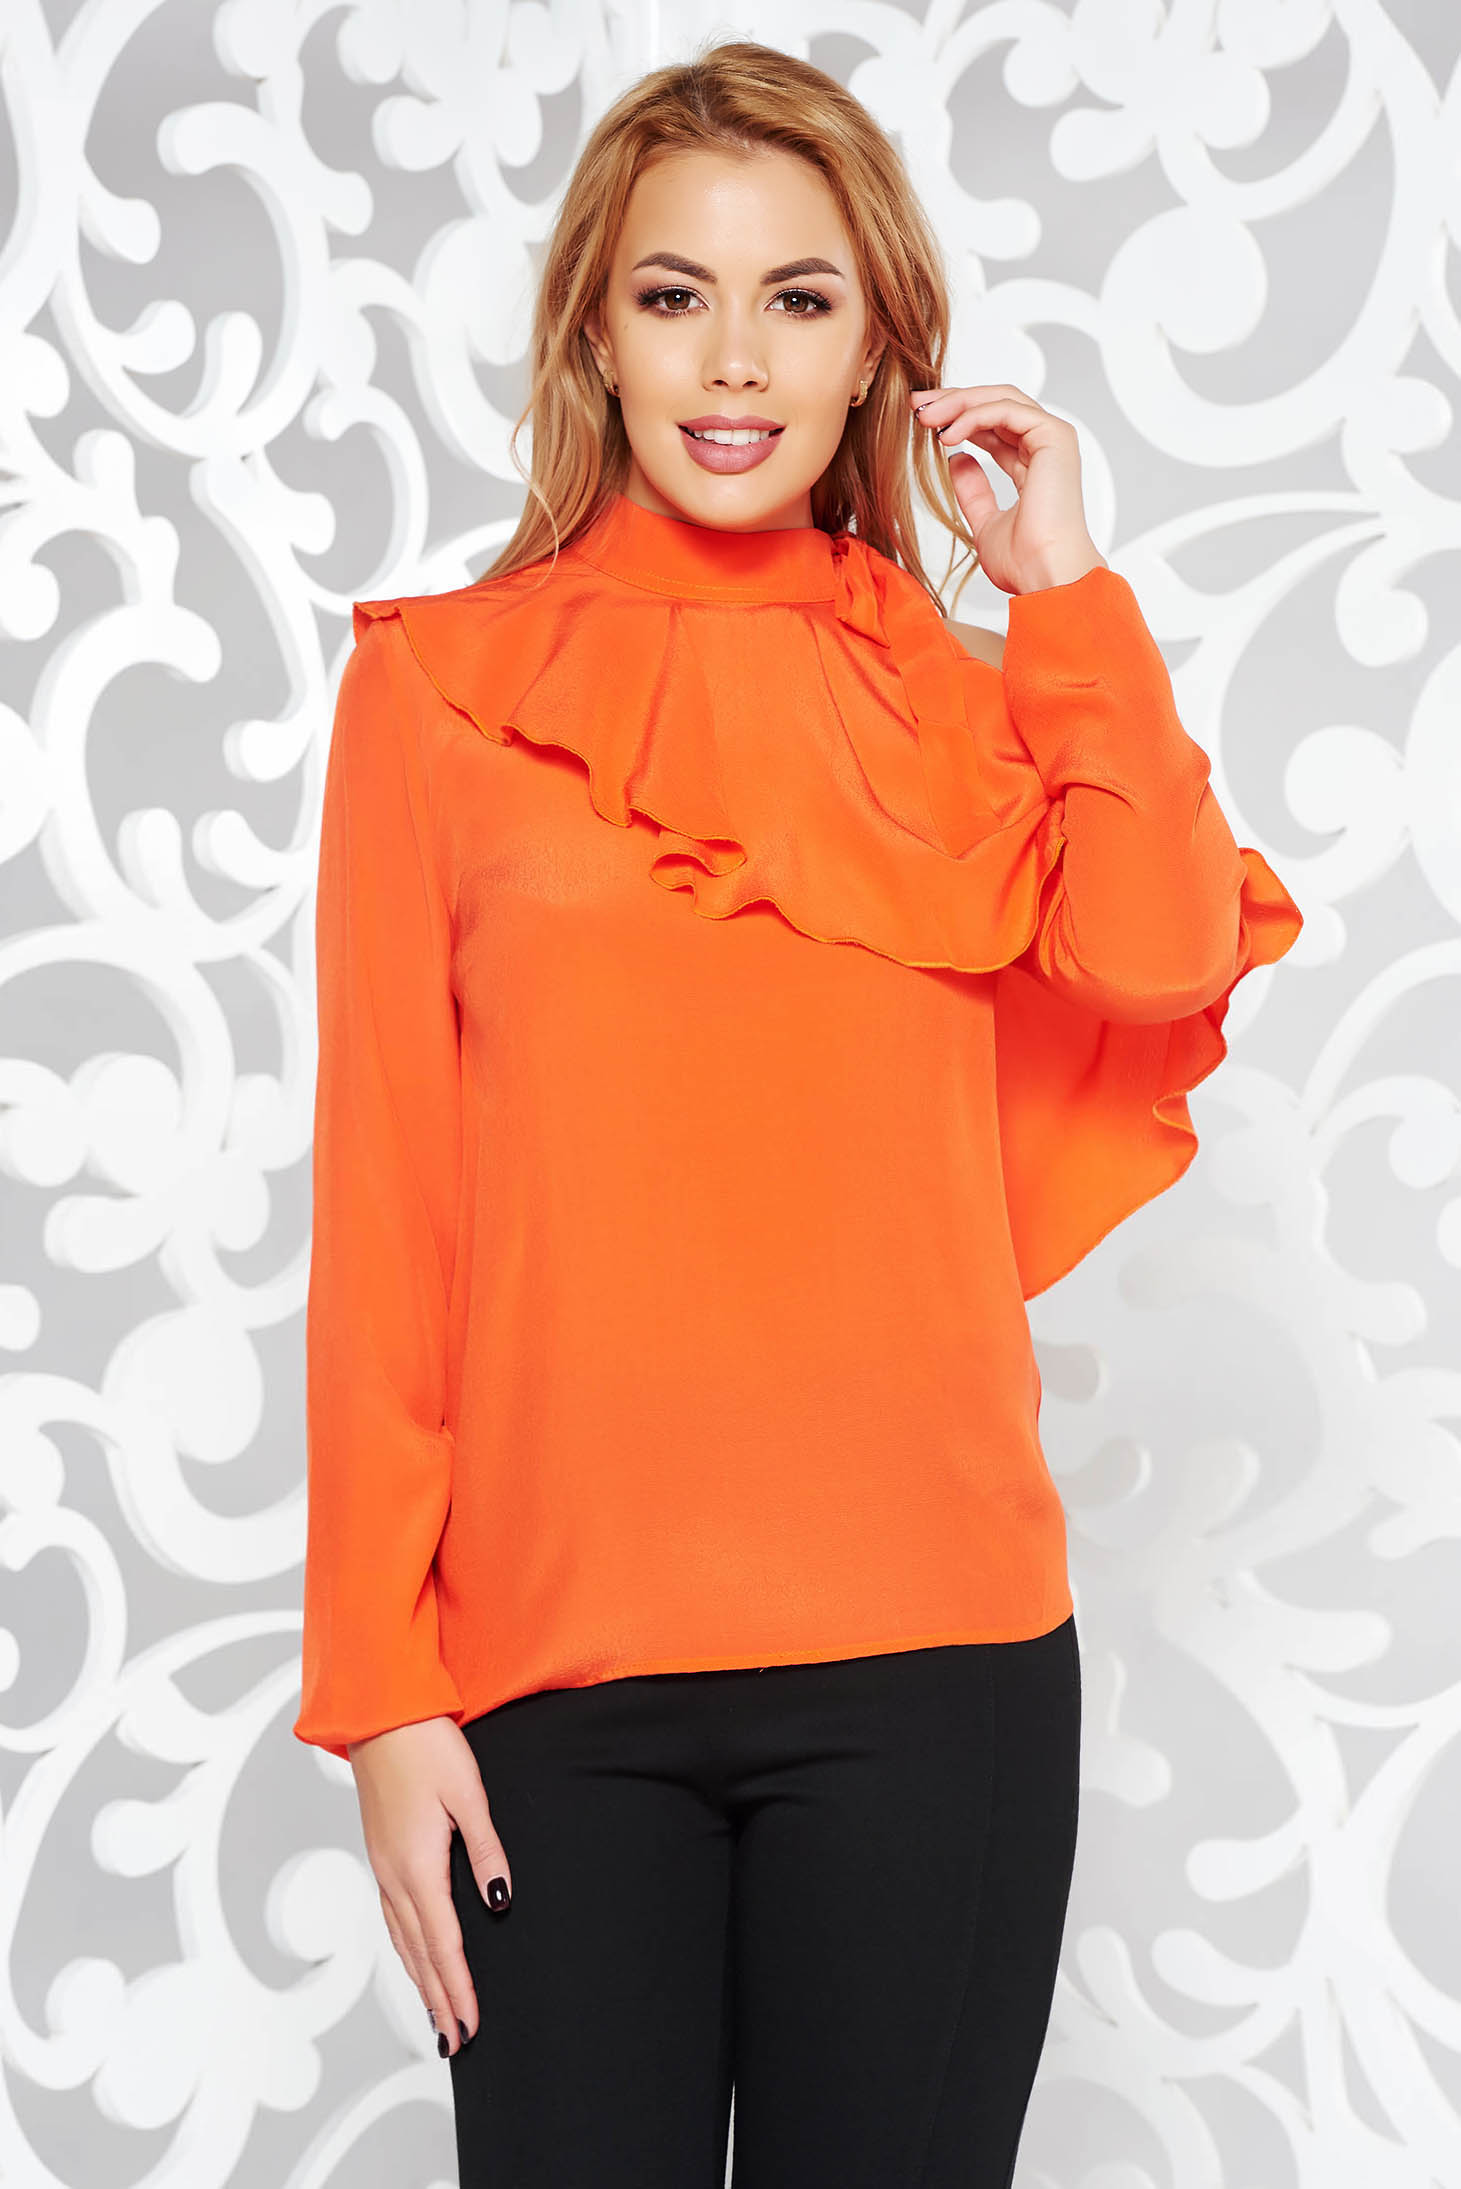 PrettyGirl coral elegant women`s blouse airy fabric both shoulders cut out with ruffle details 1 - StarShinerS.com